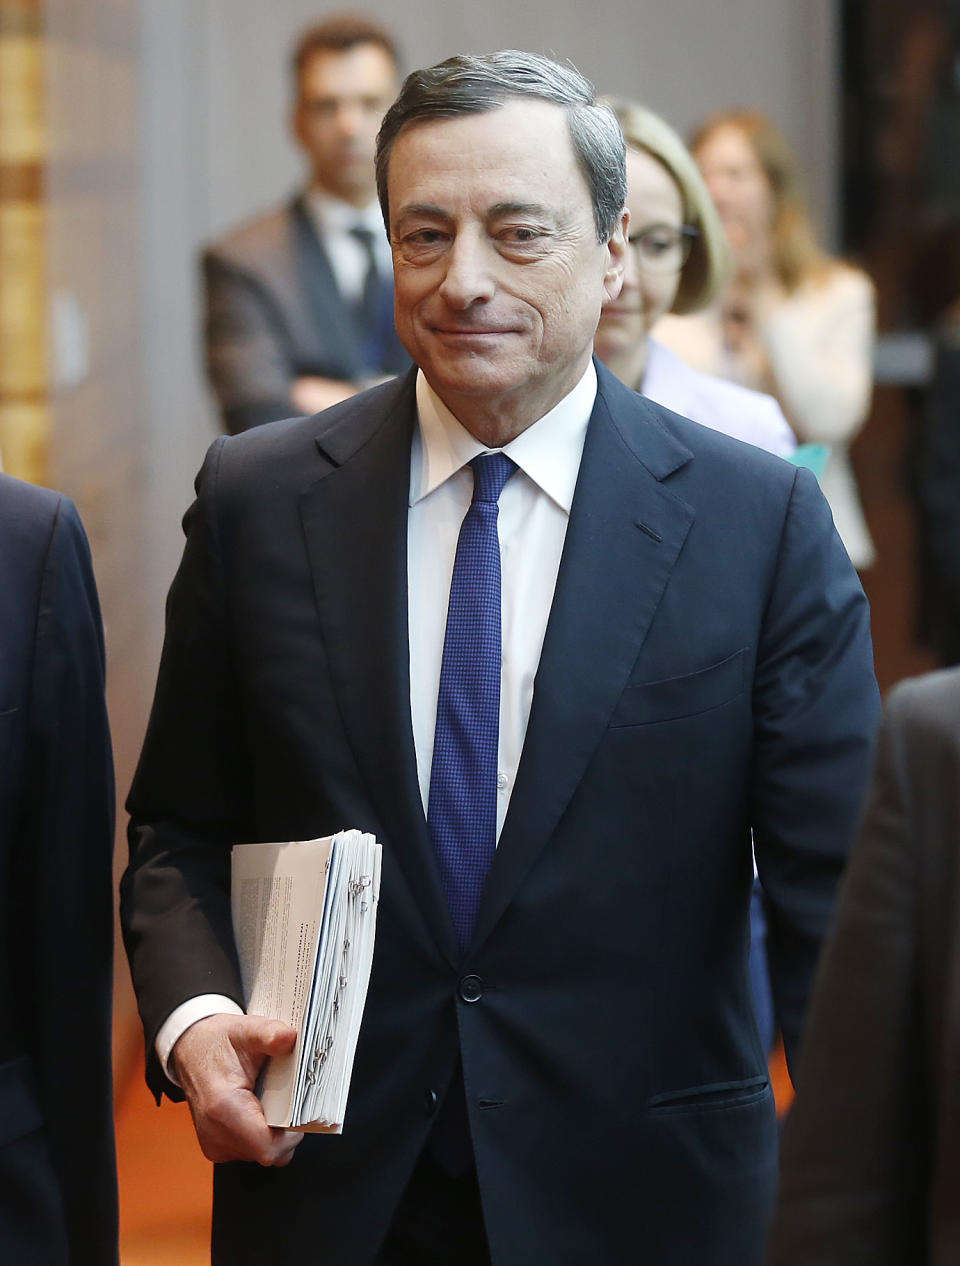 President of European Central Bank, ECB, Mario Draghi is on his way to a news conference in Frankfurt, Germany, Thursday, April 3, 2014, following a meeting of the ECB governing council. The ECB decided to leave its main interest rate unchanged. (AP Photo/Michael Probst)